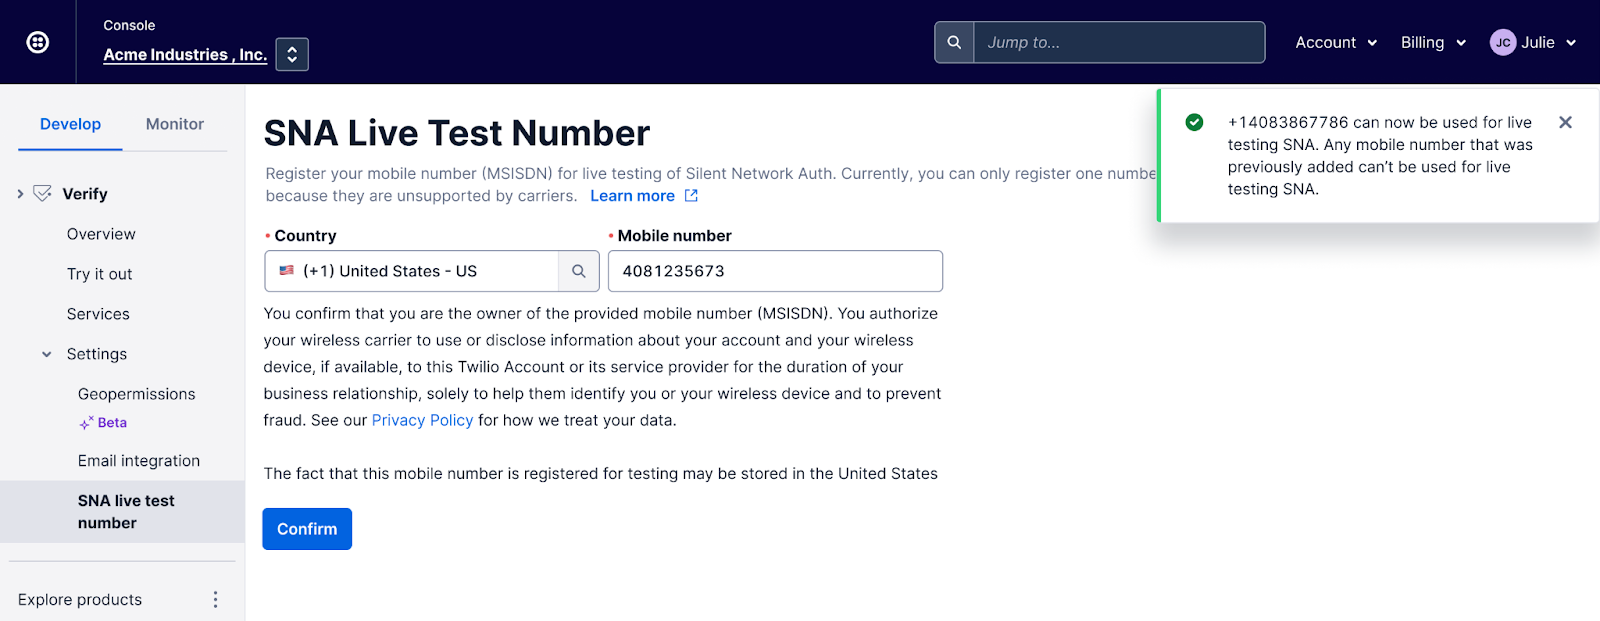 SNA Live Test Number screen on Twilio Console showing country input, mobile number input, confirmation button and success message.